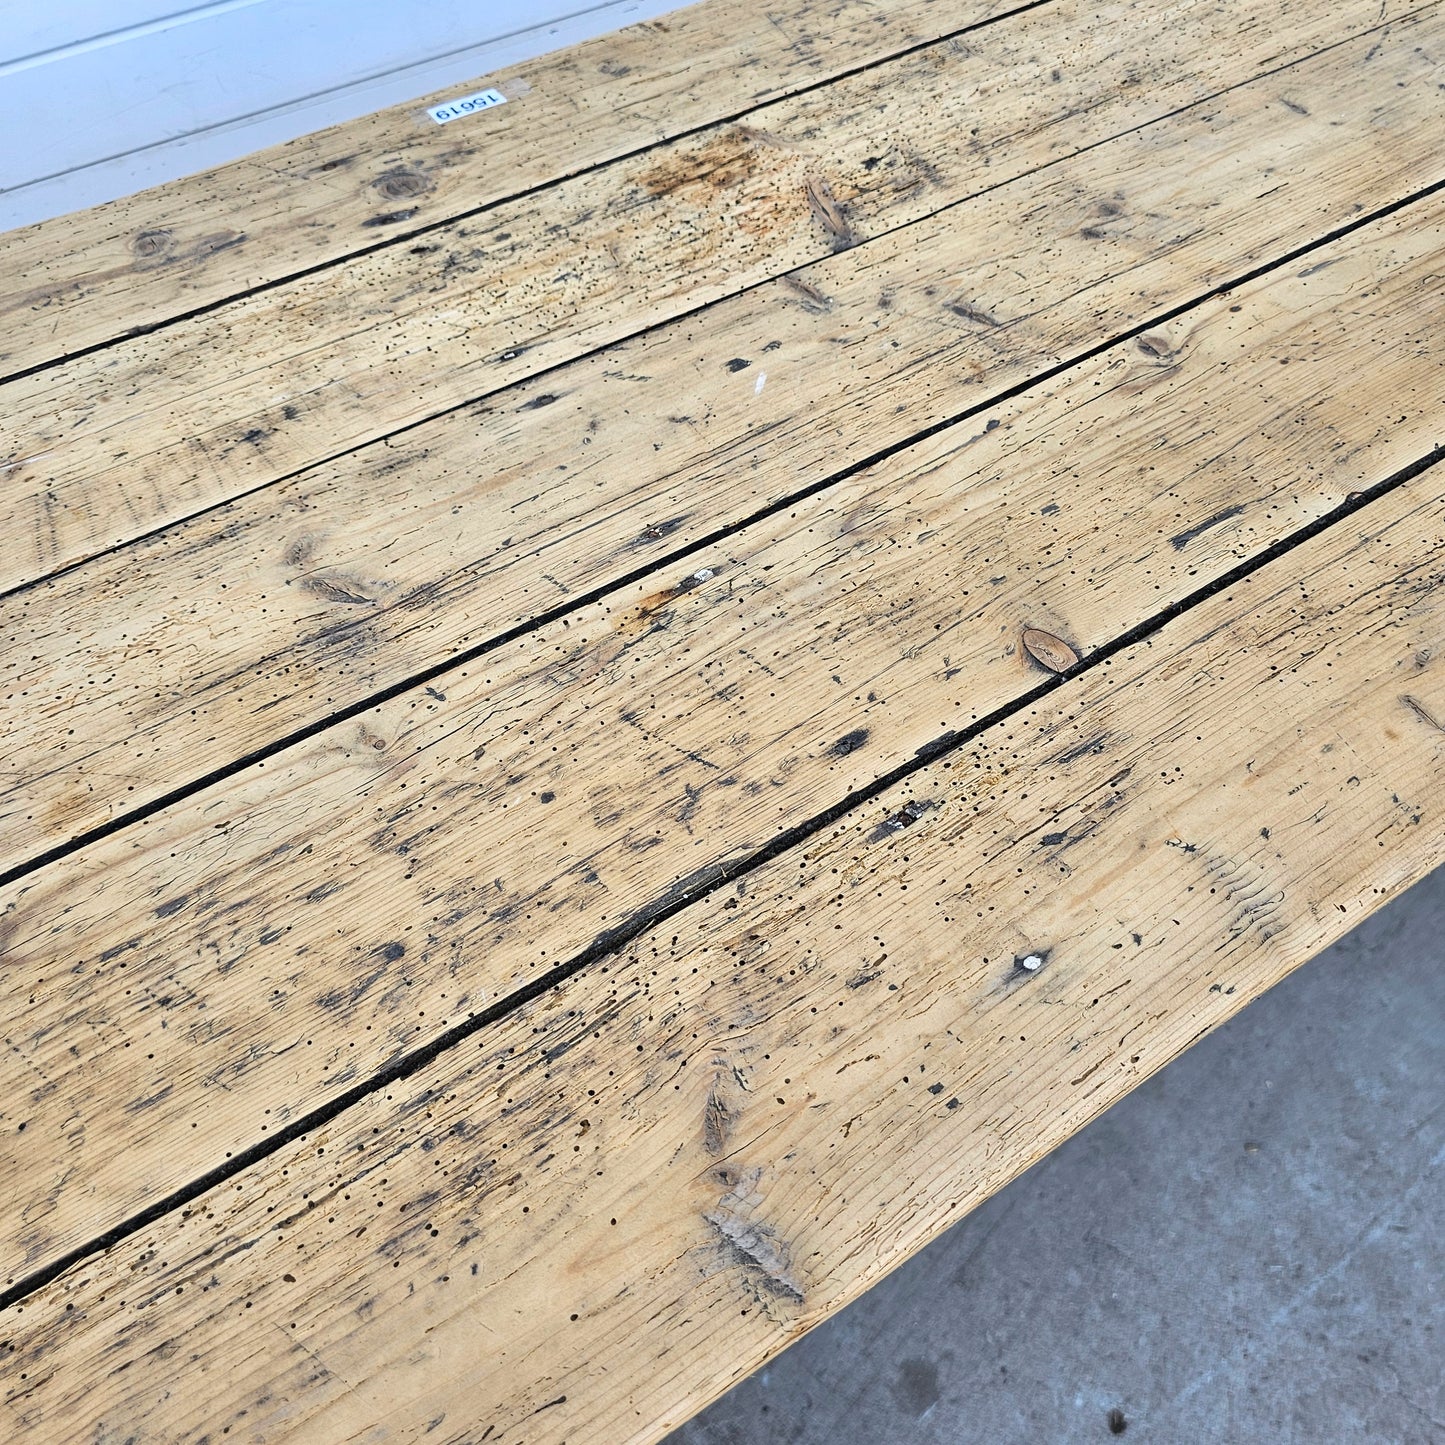 Bleached French Vineyard Table